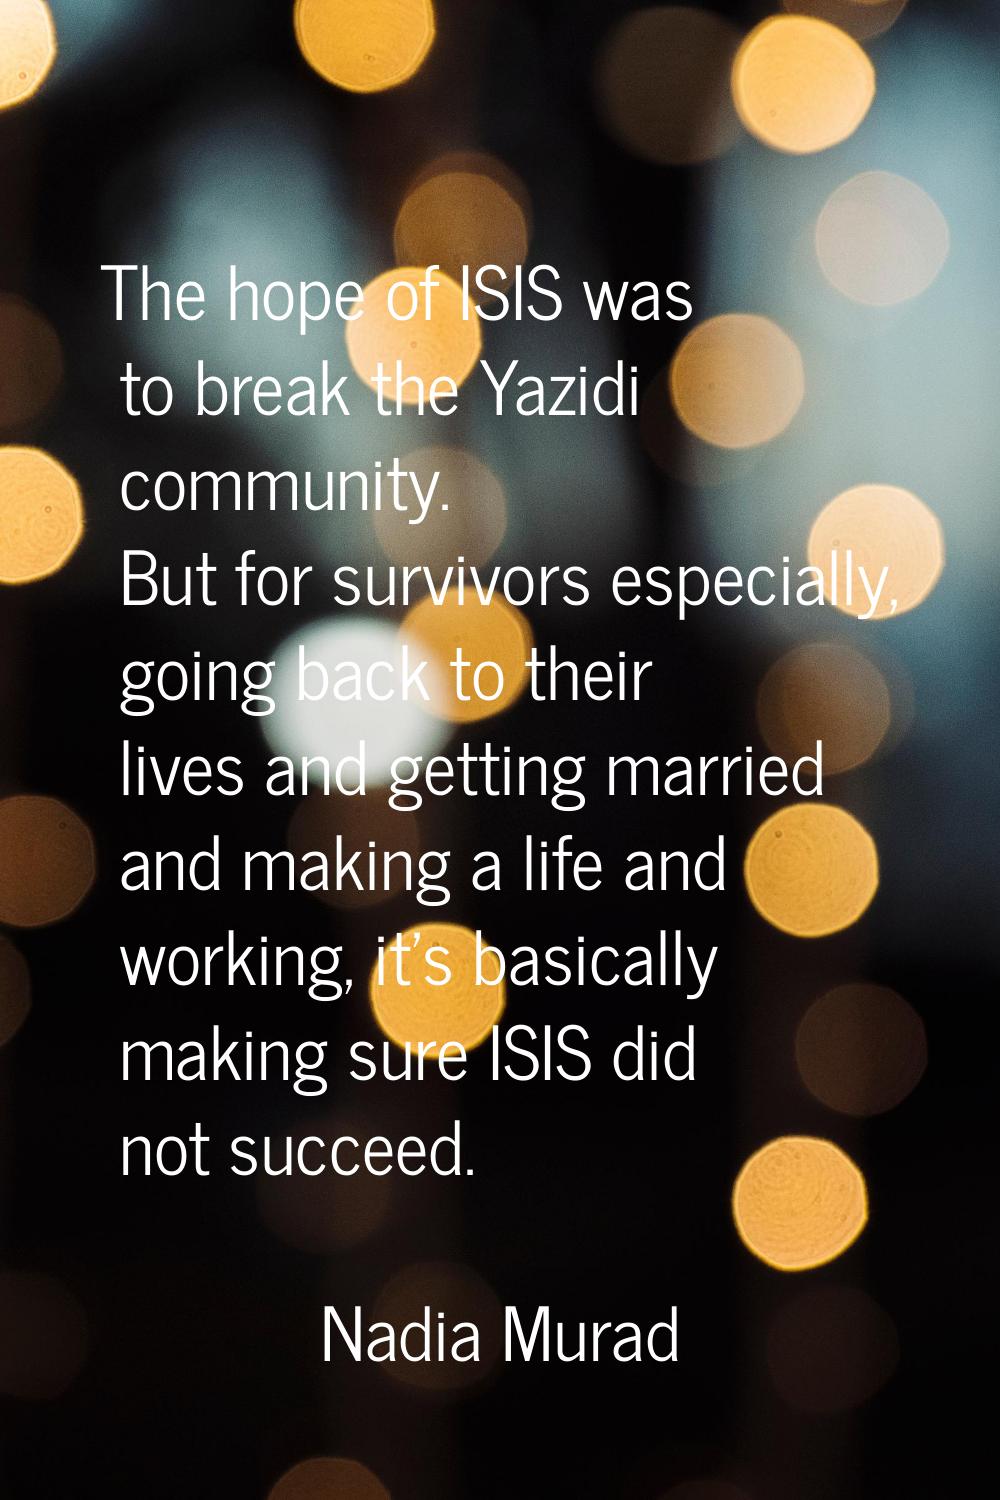 The hope of ISIS was to break the Yazidi community. But for survivors especially, going back to the